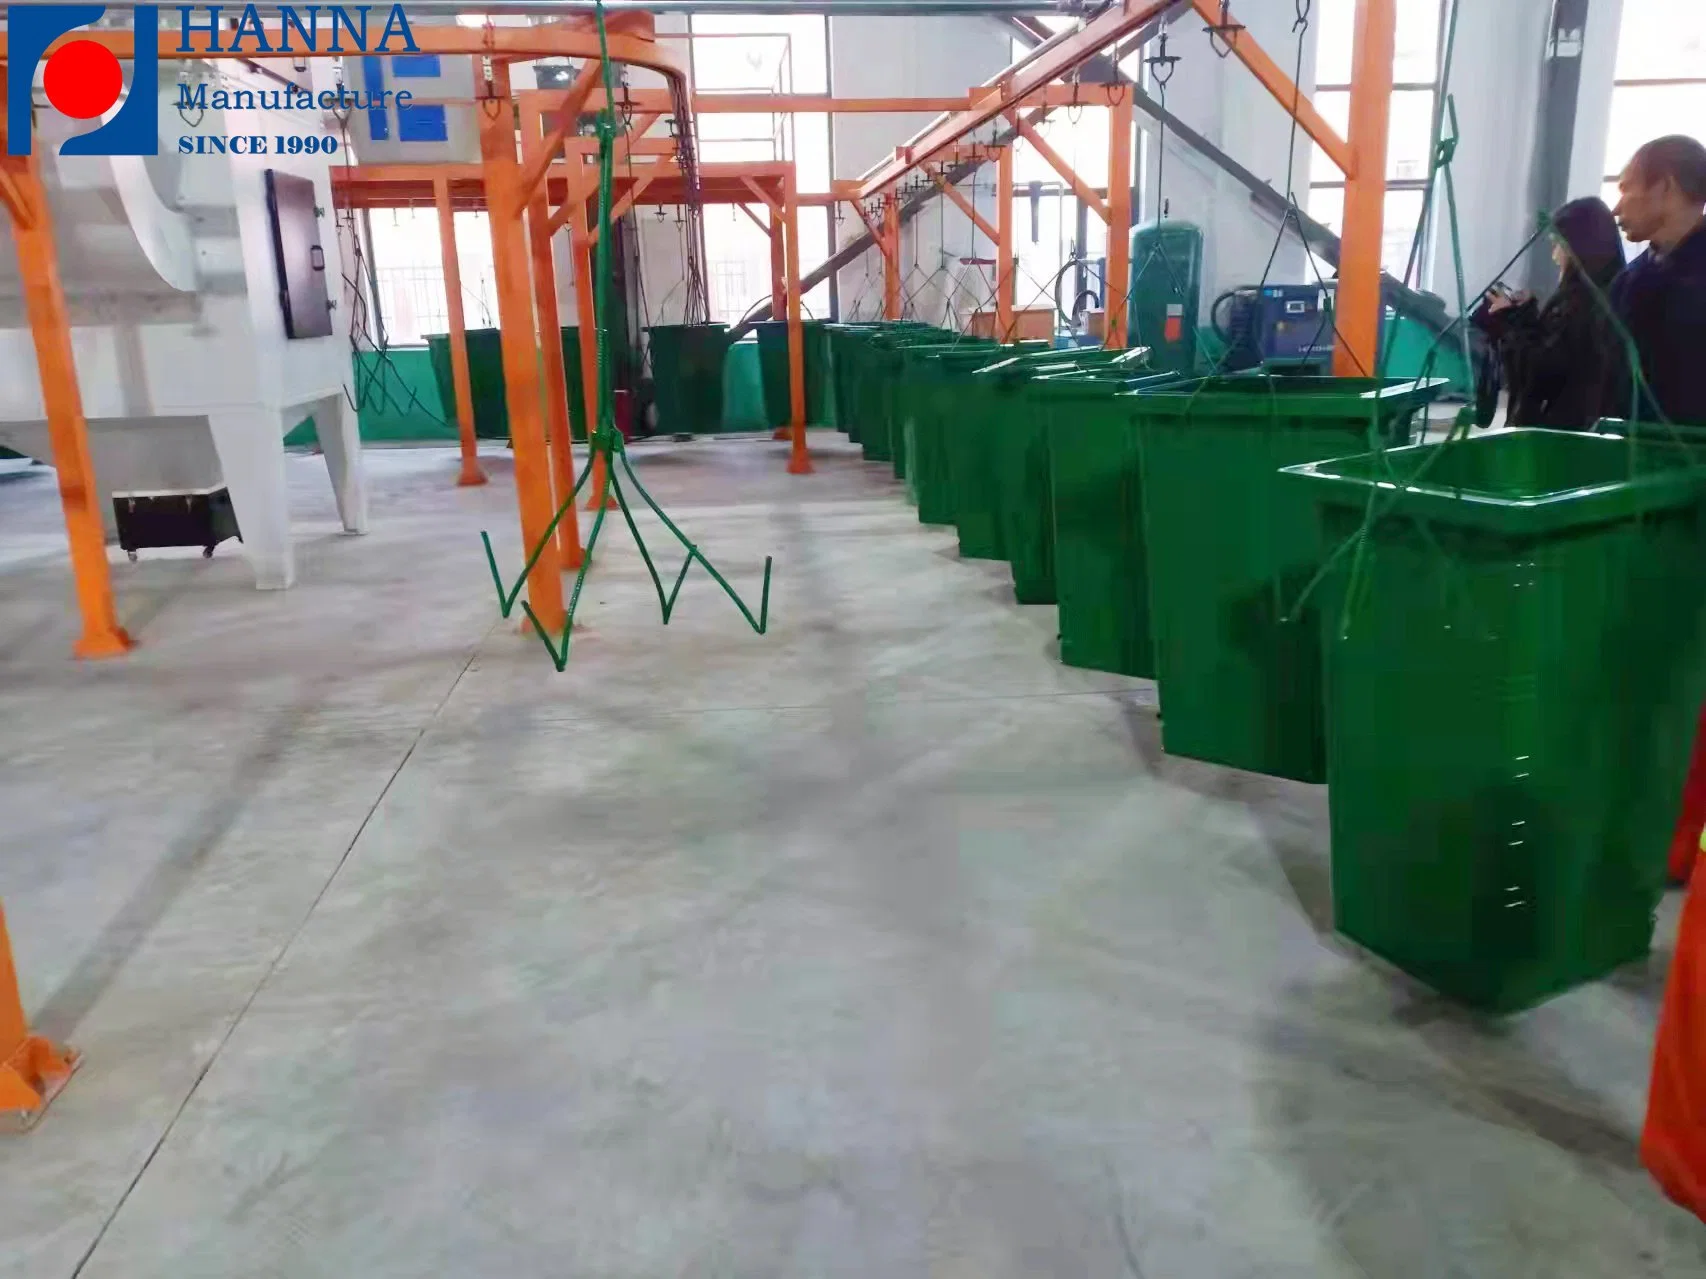 Complete Electrostatic Powder Coating Equipment Spraying System Line Painting Machine Equipment for Metal Cans Bucket Rubbish Can